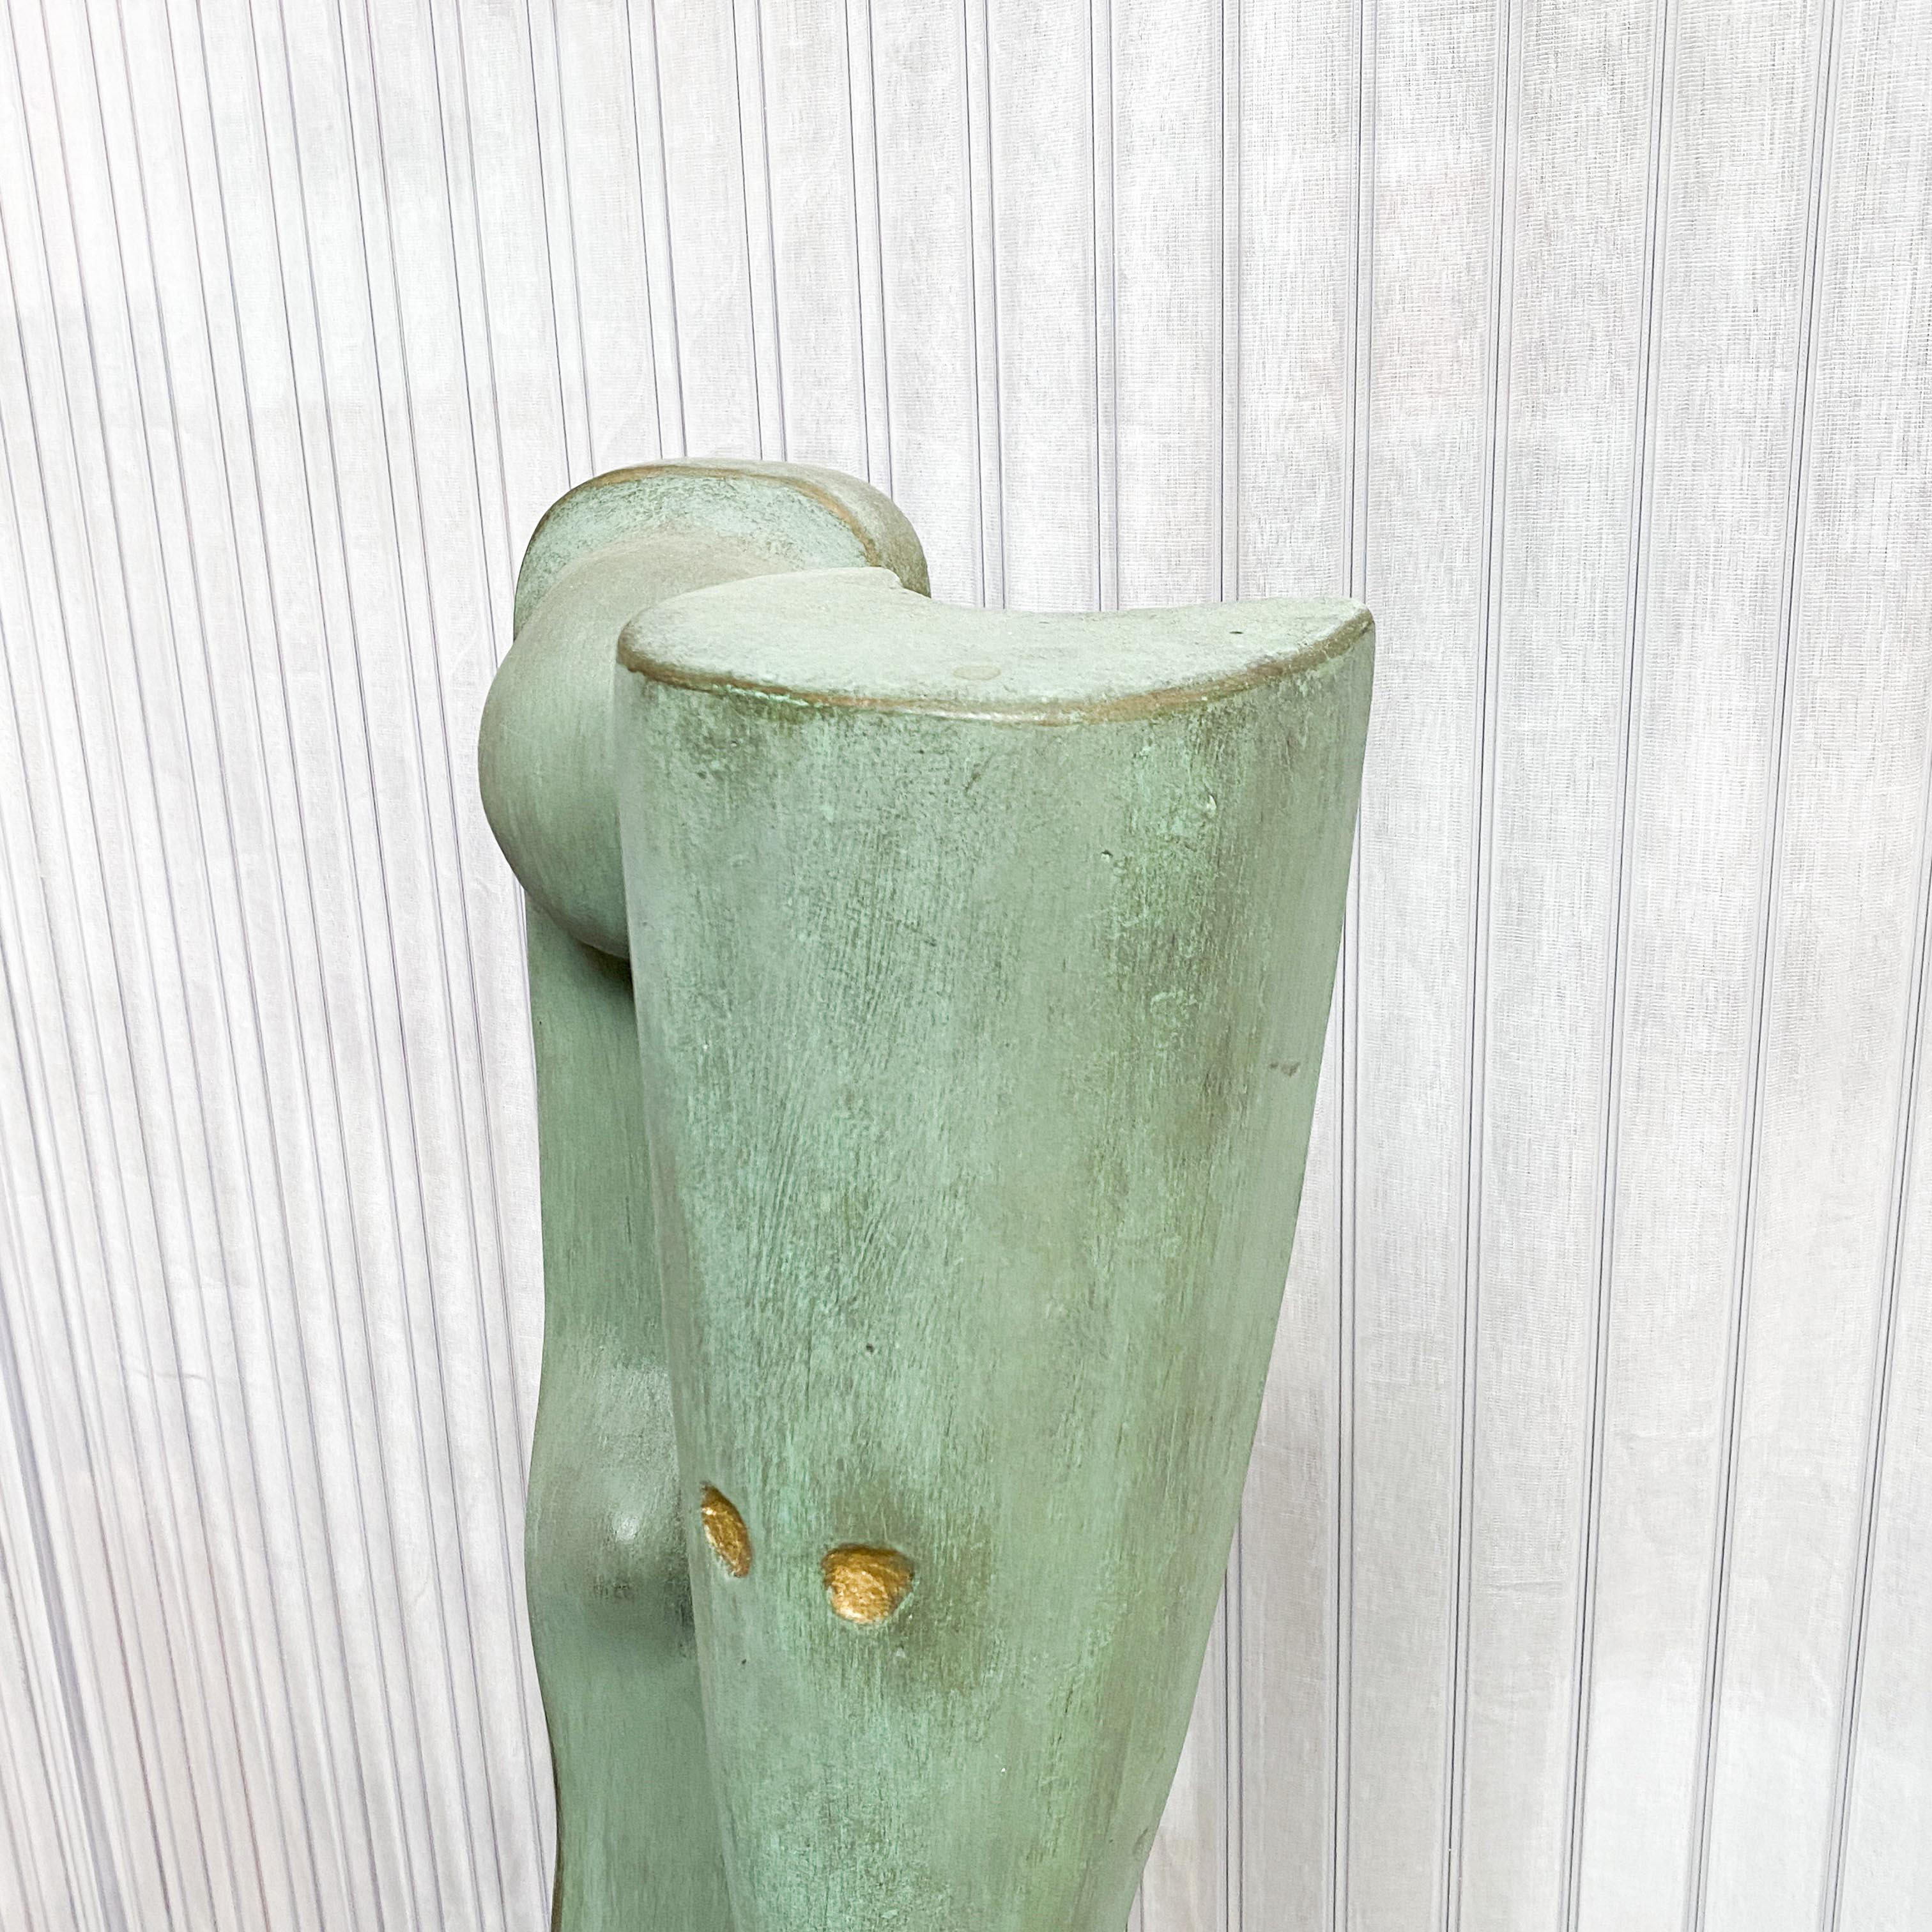 Hand-Crafted MODERNIST GREEN SCULPTURE IN plaster, “Green couple”, 1960S For Sale